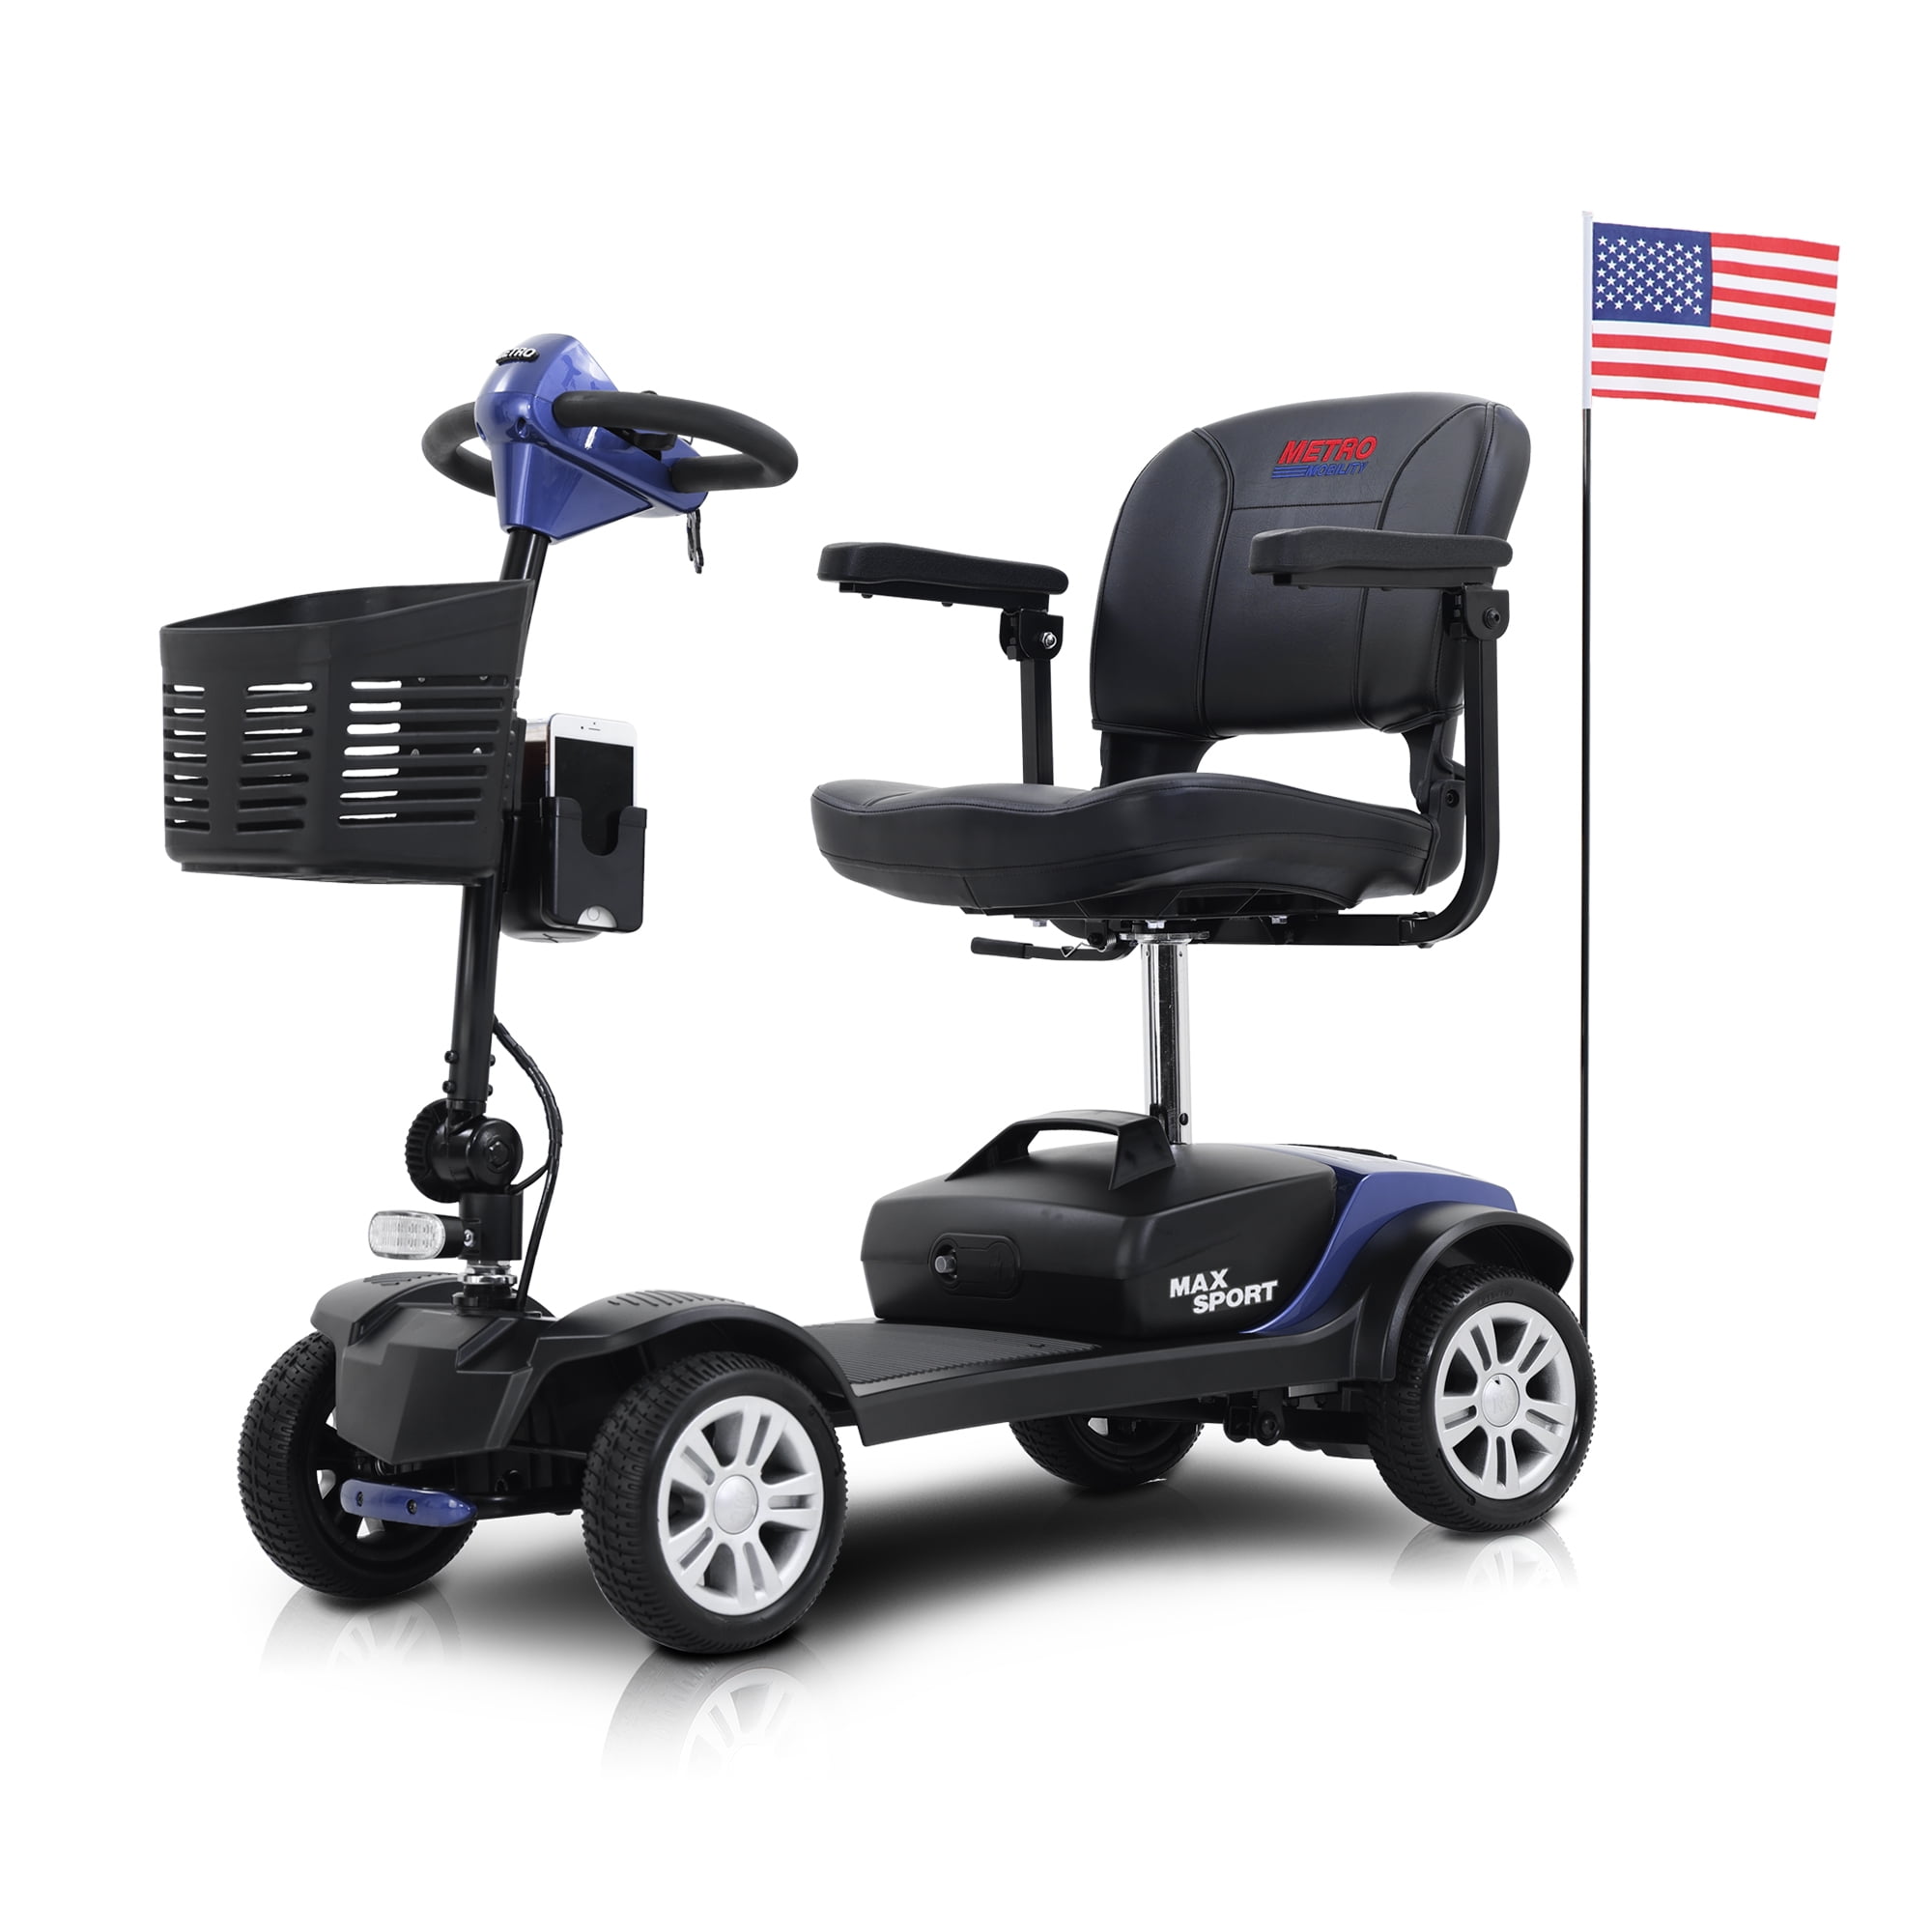 Mobility Scooters On Clearance and Sale,Folding Electric Motorized Wheelchair4 Wheels Outdoor Compact Mobility Scooter with 2 1 Cup & Phone Holder - Walmart.com